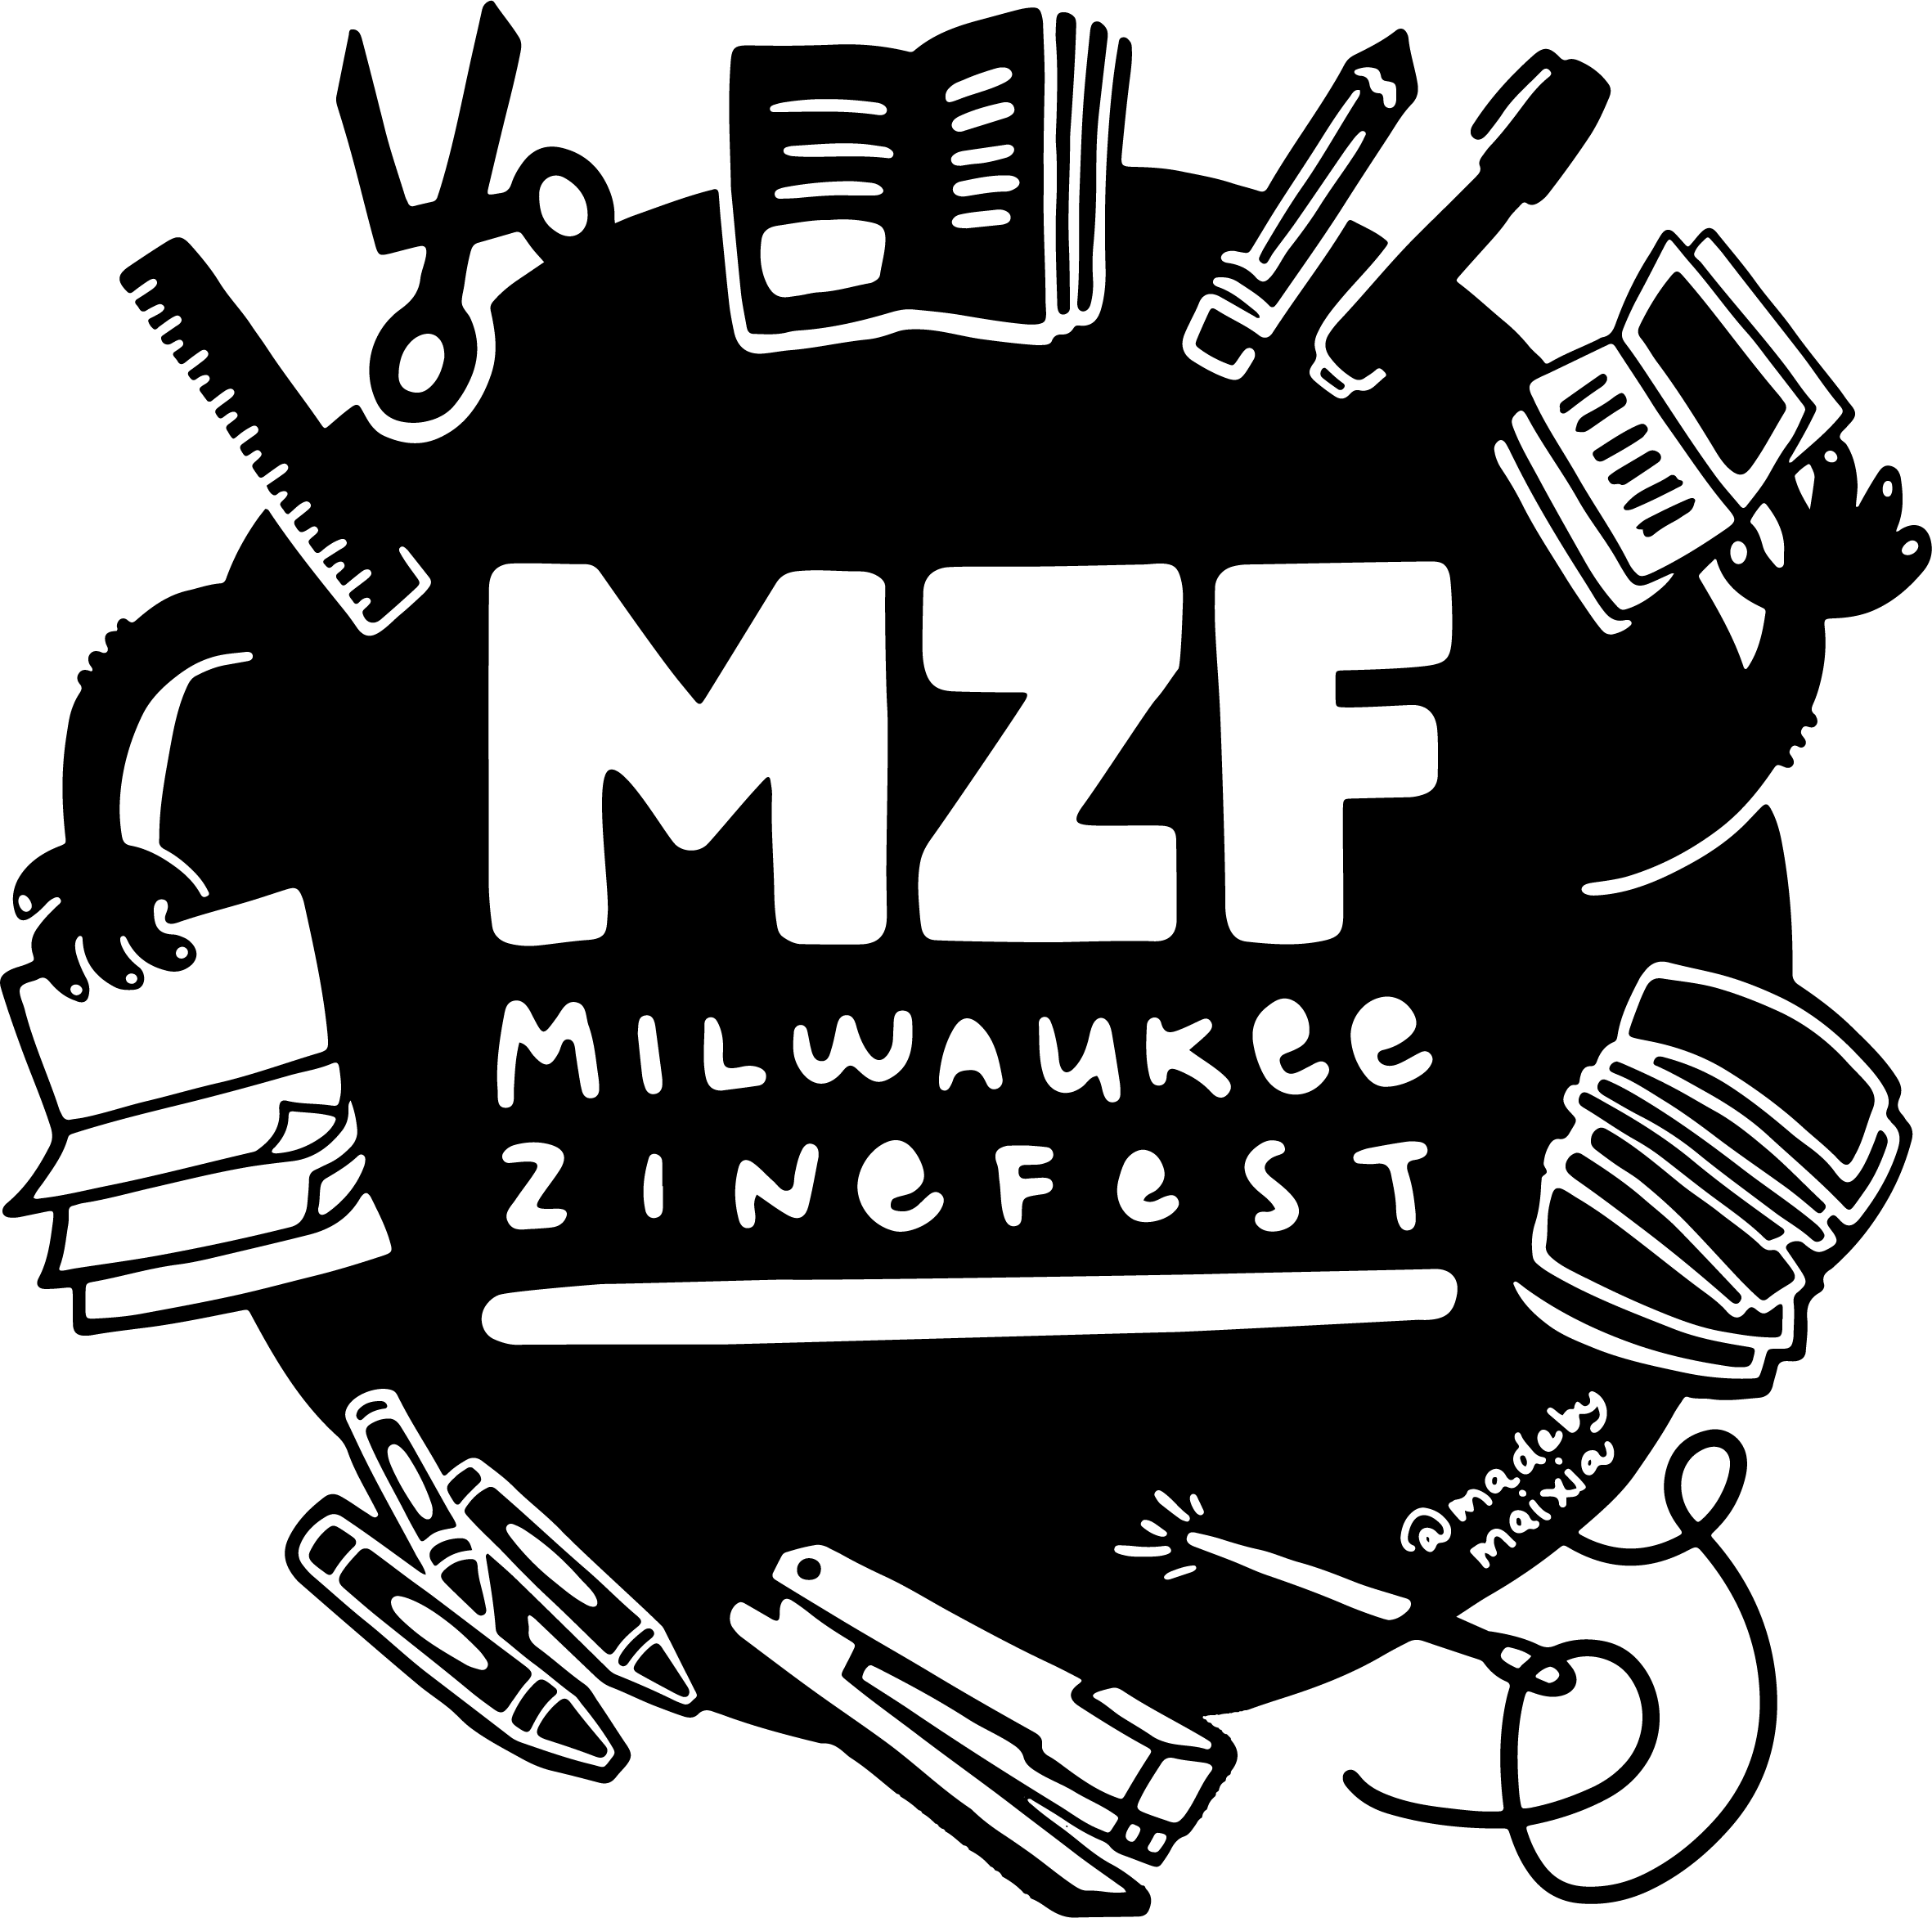 Milwaukee Zine Fest logo in black and white. Text in center in white surrounded by line drawings of tools used to create zines (paper, stapler, computer, thread, etc.)